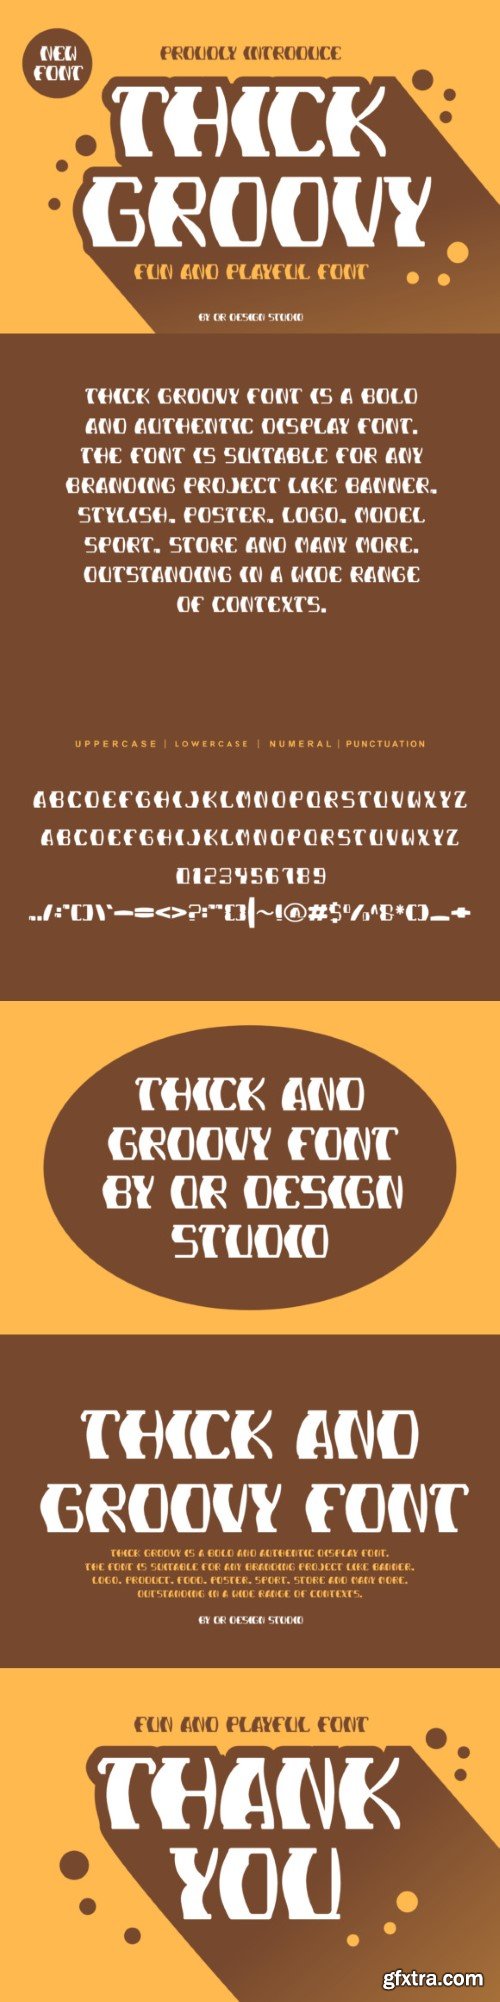 Thick Groovy Font